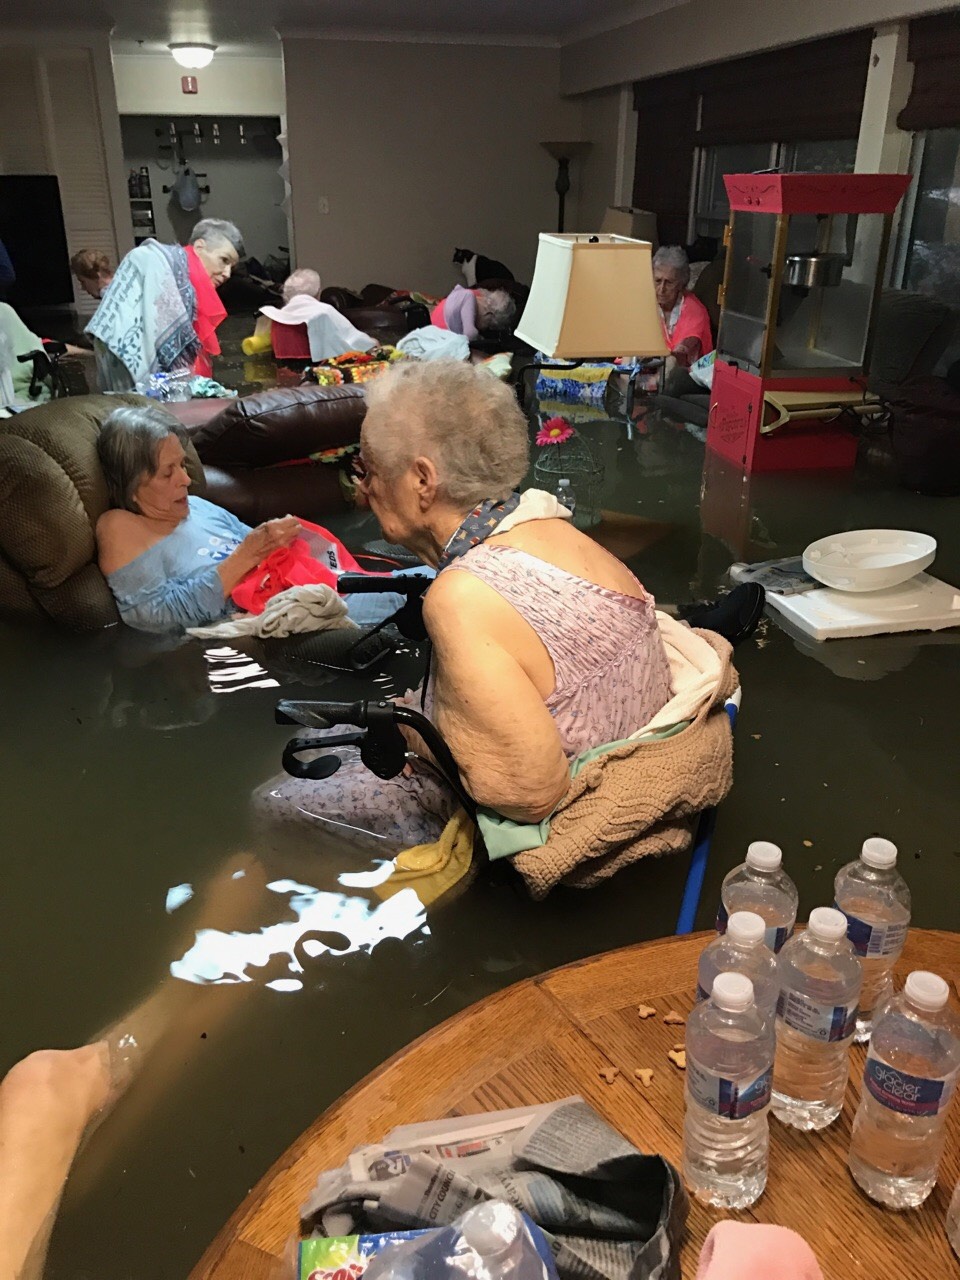 Residents of La Vita Bella nursing home in Dickinson, Texas were trapped due to severe flooding from Hurricane Harvey on Aug. 27.